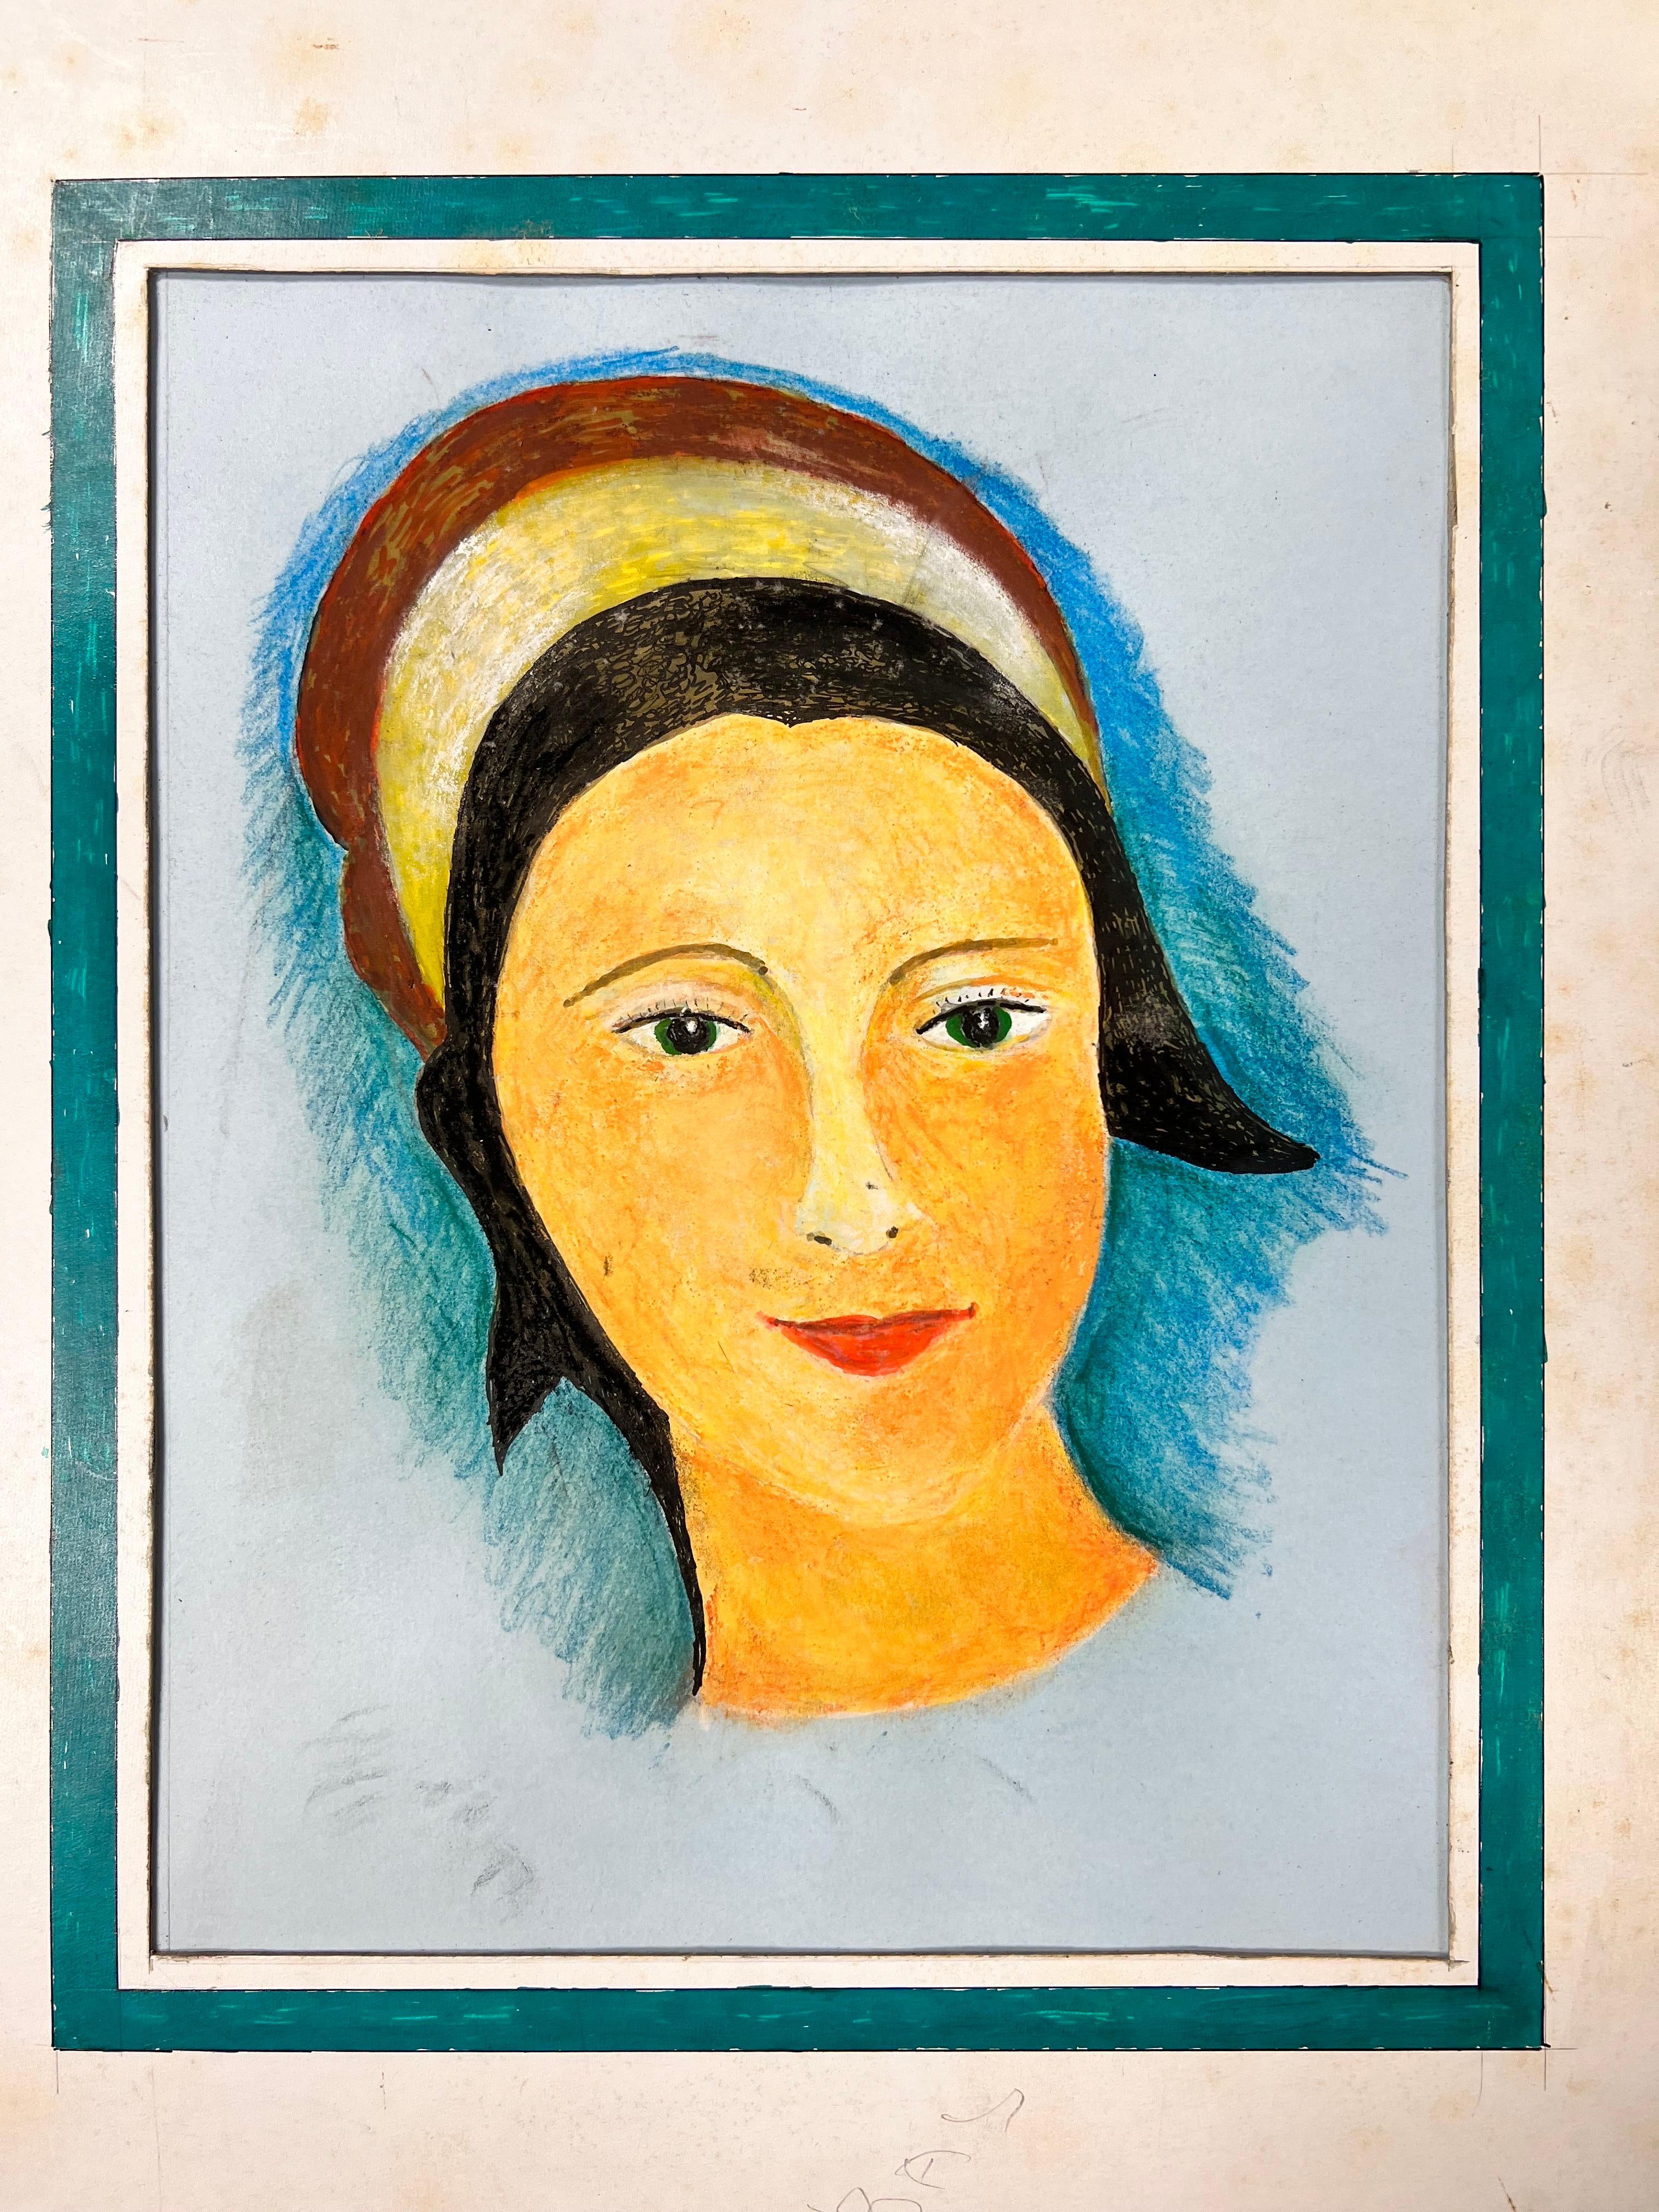 Green Eye Girl
by Bernard Labbe (French mid 20th century)
original gouache on paper, mounted on card
size: 16 x 13 inches
condition: very good and ready to be enjoyed

provenance: the artists atelier/ studio, France (stamped verso)